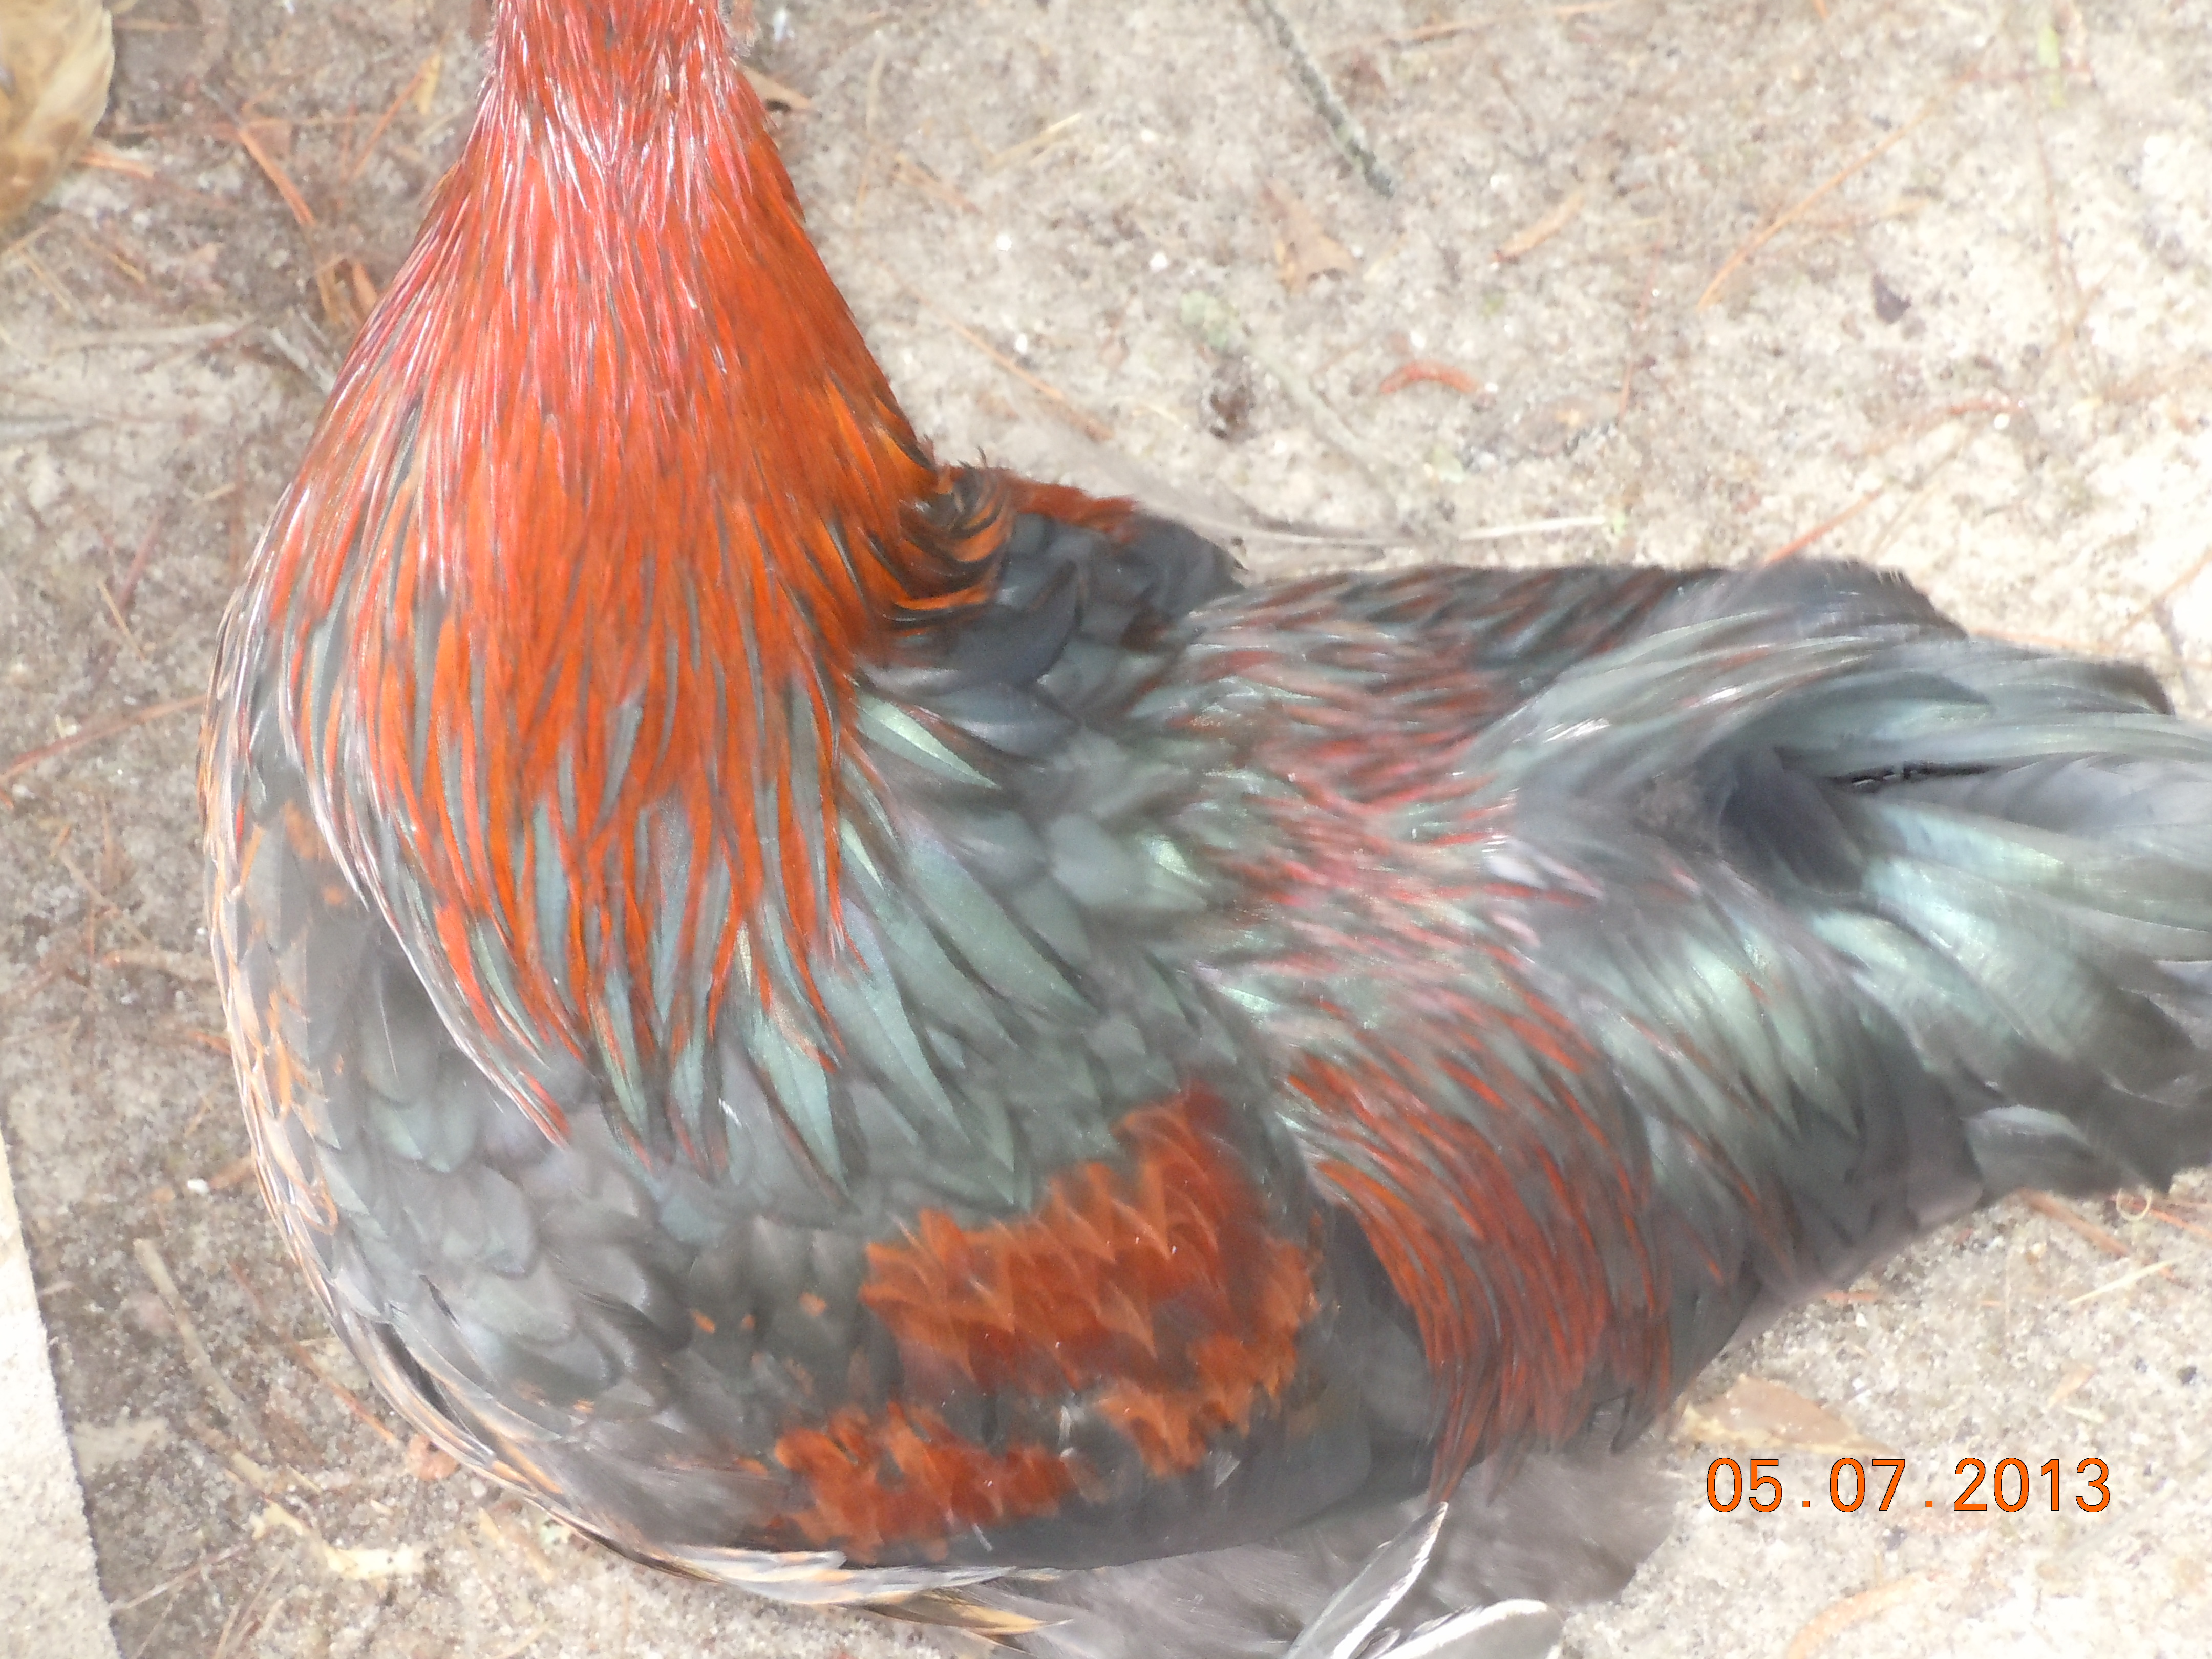 A close-up of Elvis, my rooster